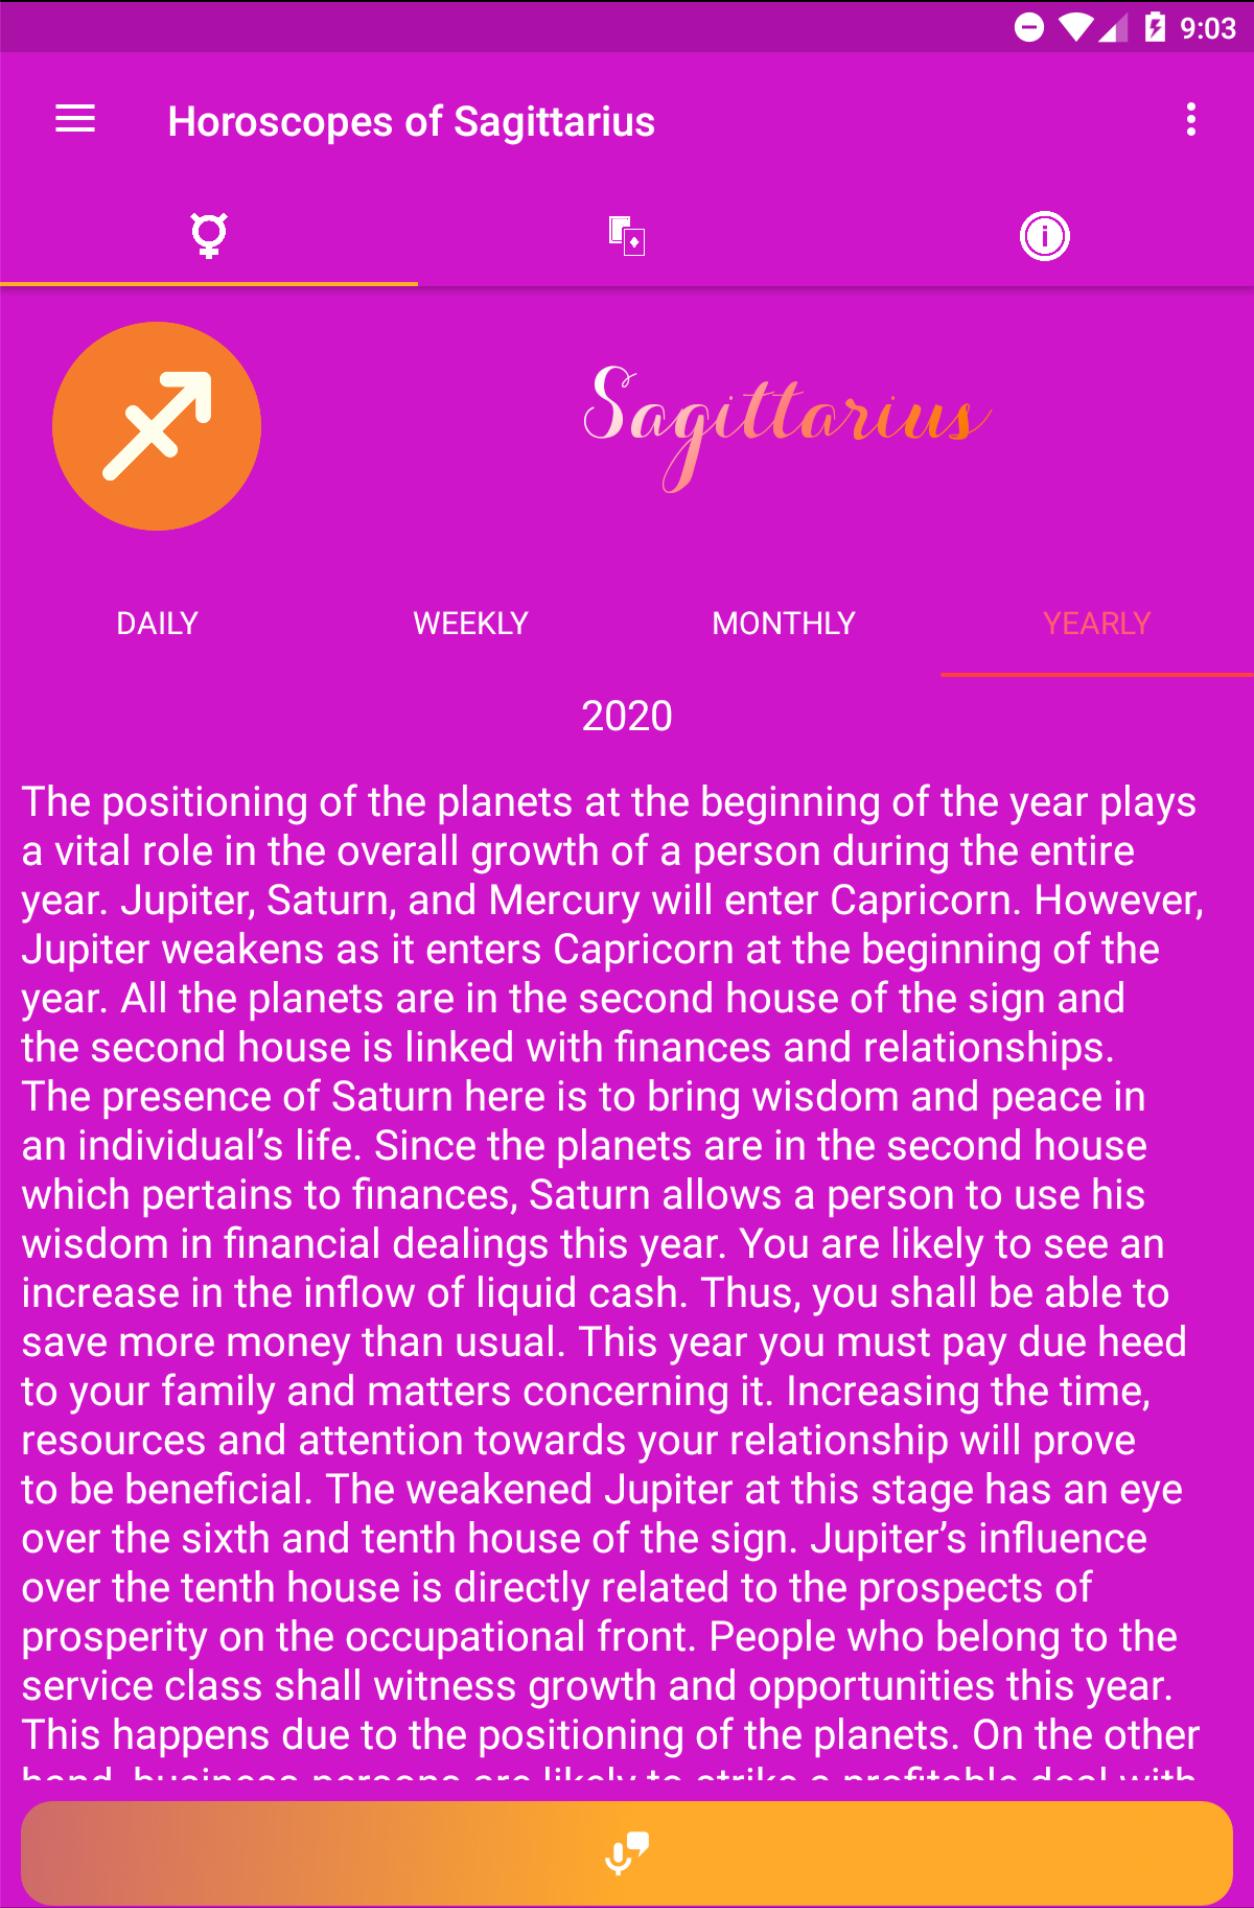 Sagittarius horoscope today, Tarot cards for Android - APK Download